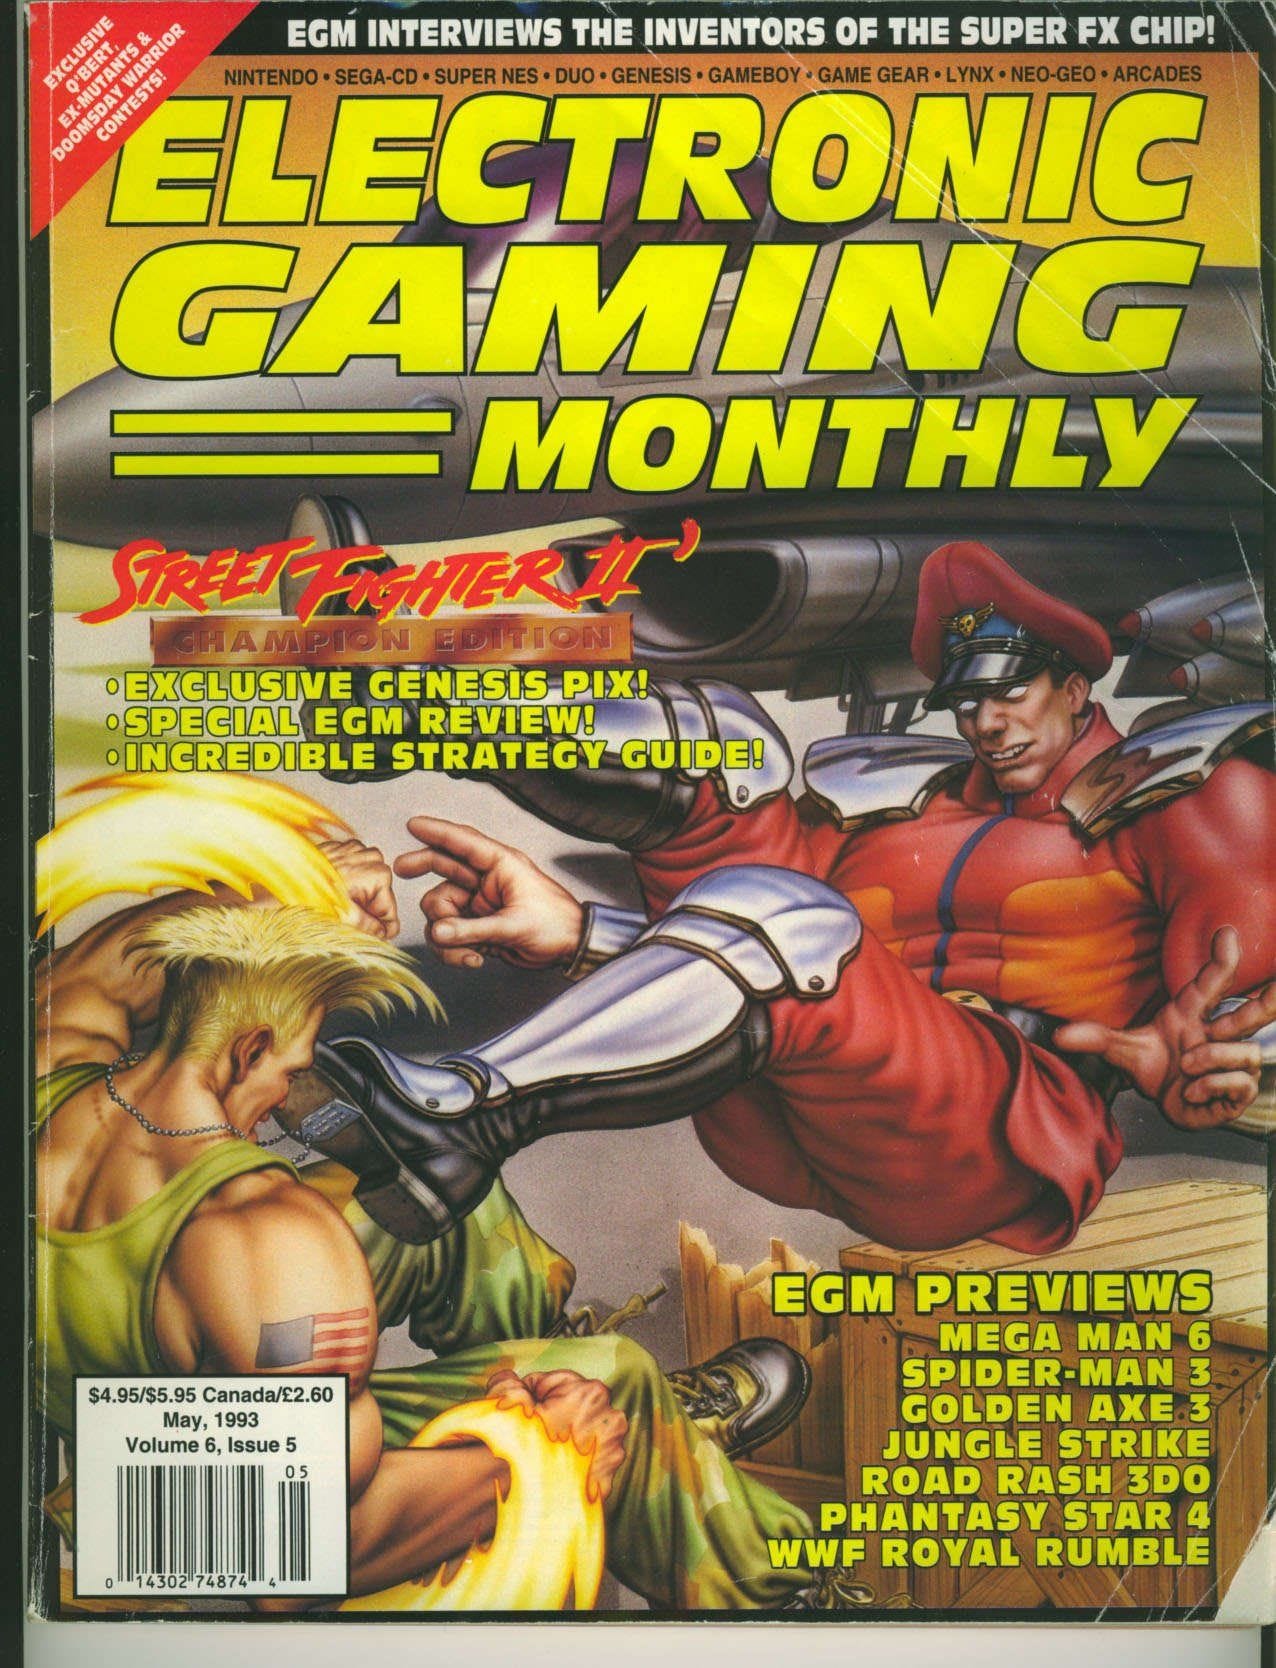 A Look Into the Future of eGaming - Old School Gamer Magazine